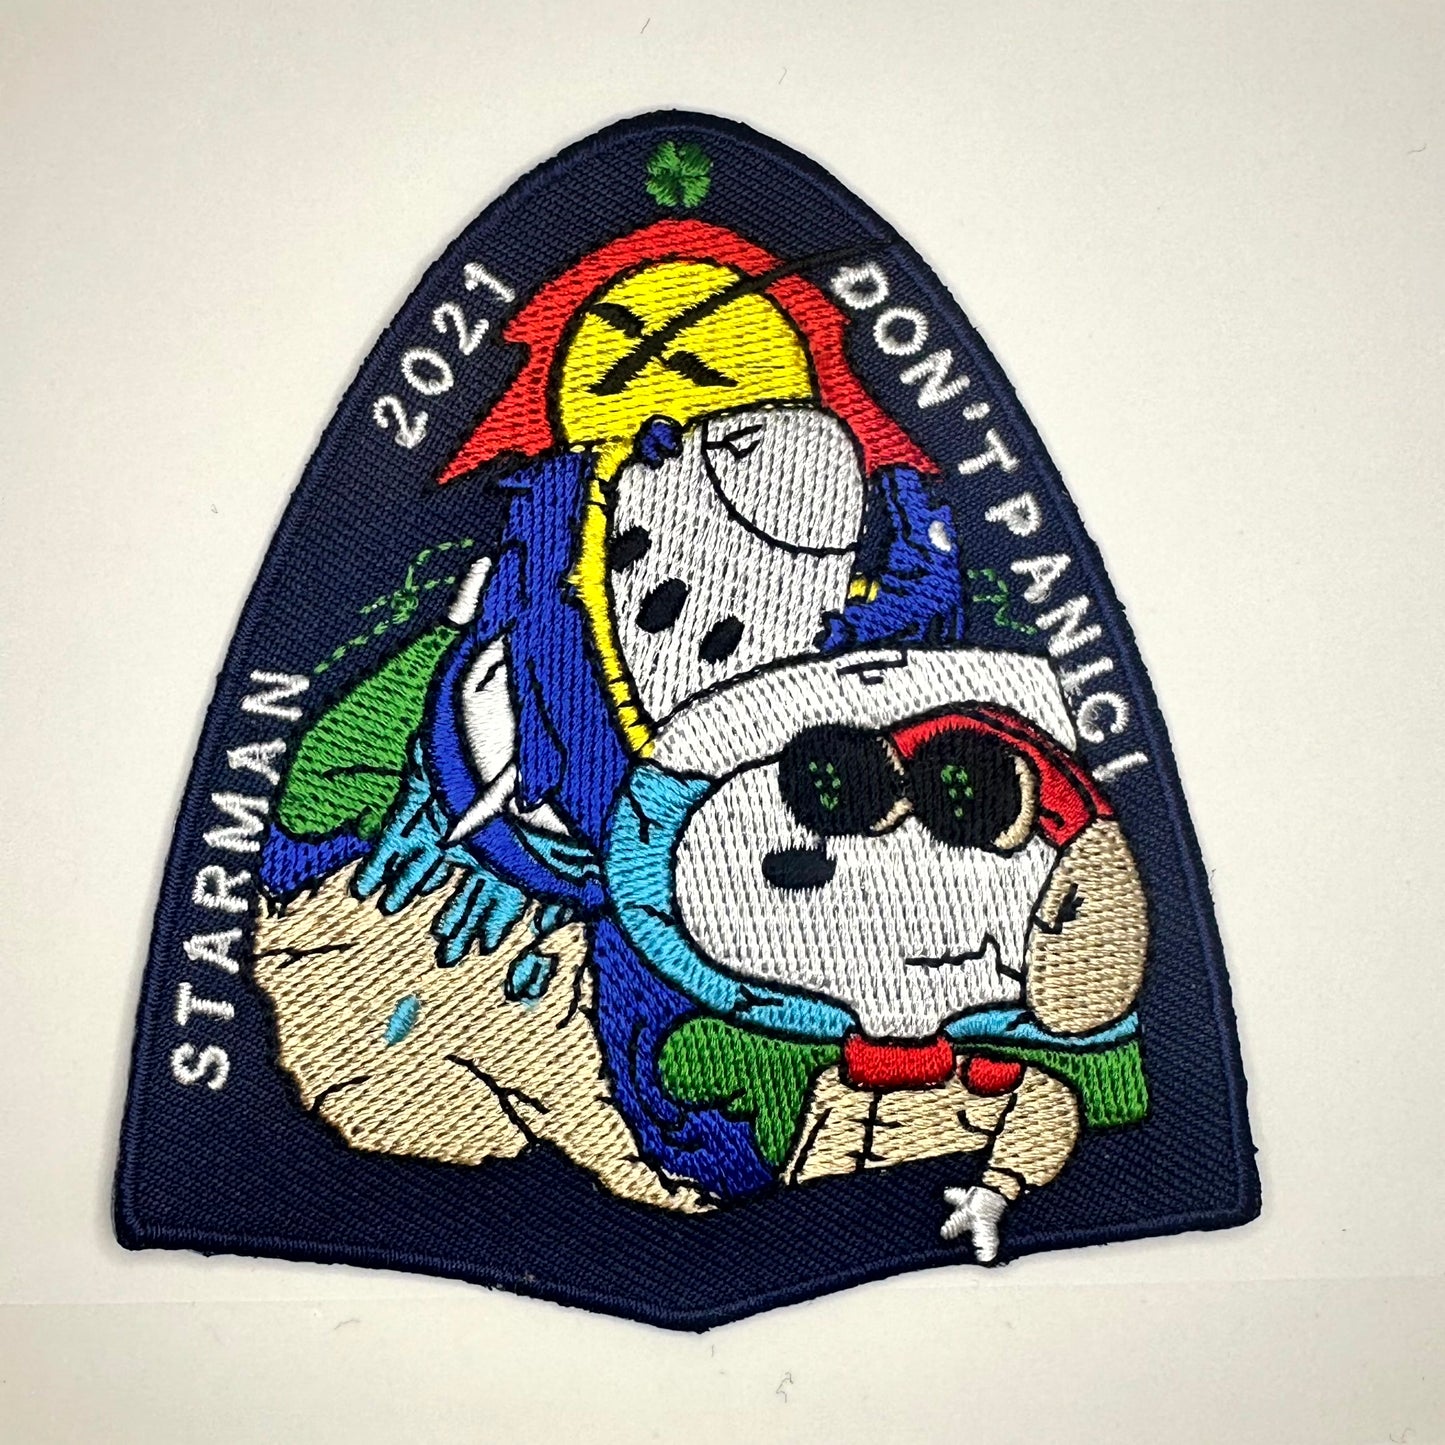 NASA SPACEX STARMAN DONT PANIC 2021 SPACE PATCH - 3.5”